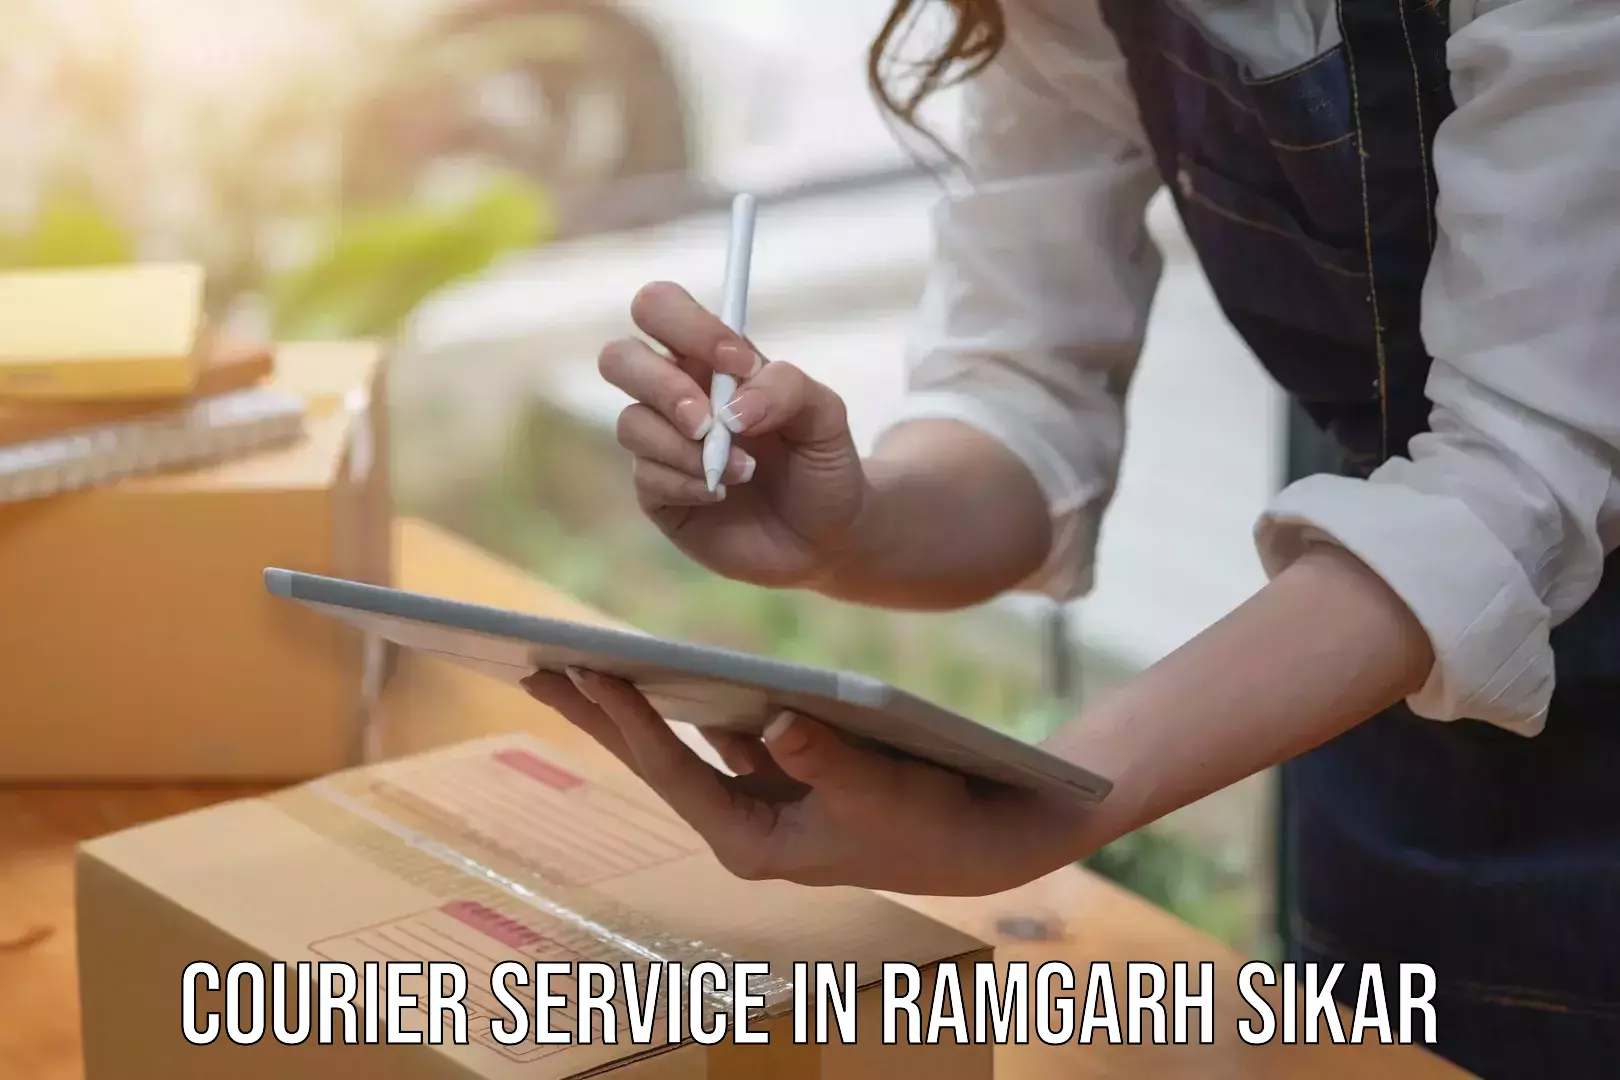 Individual parcel service in Ramgarh Sikar